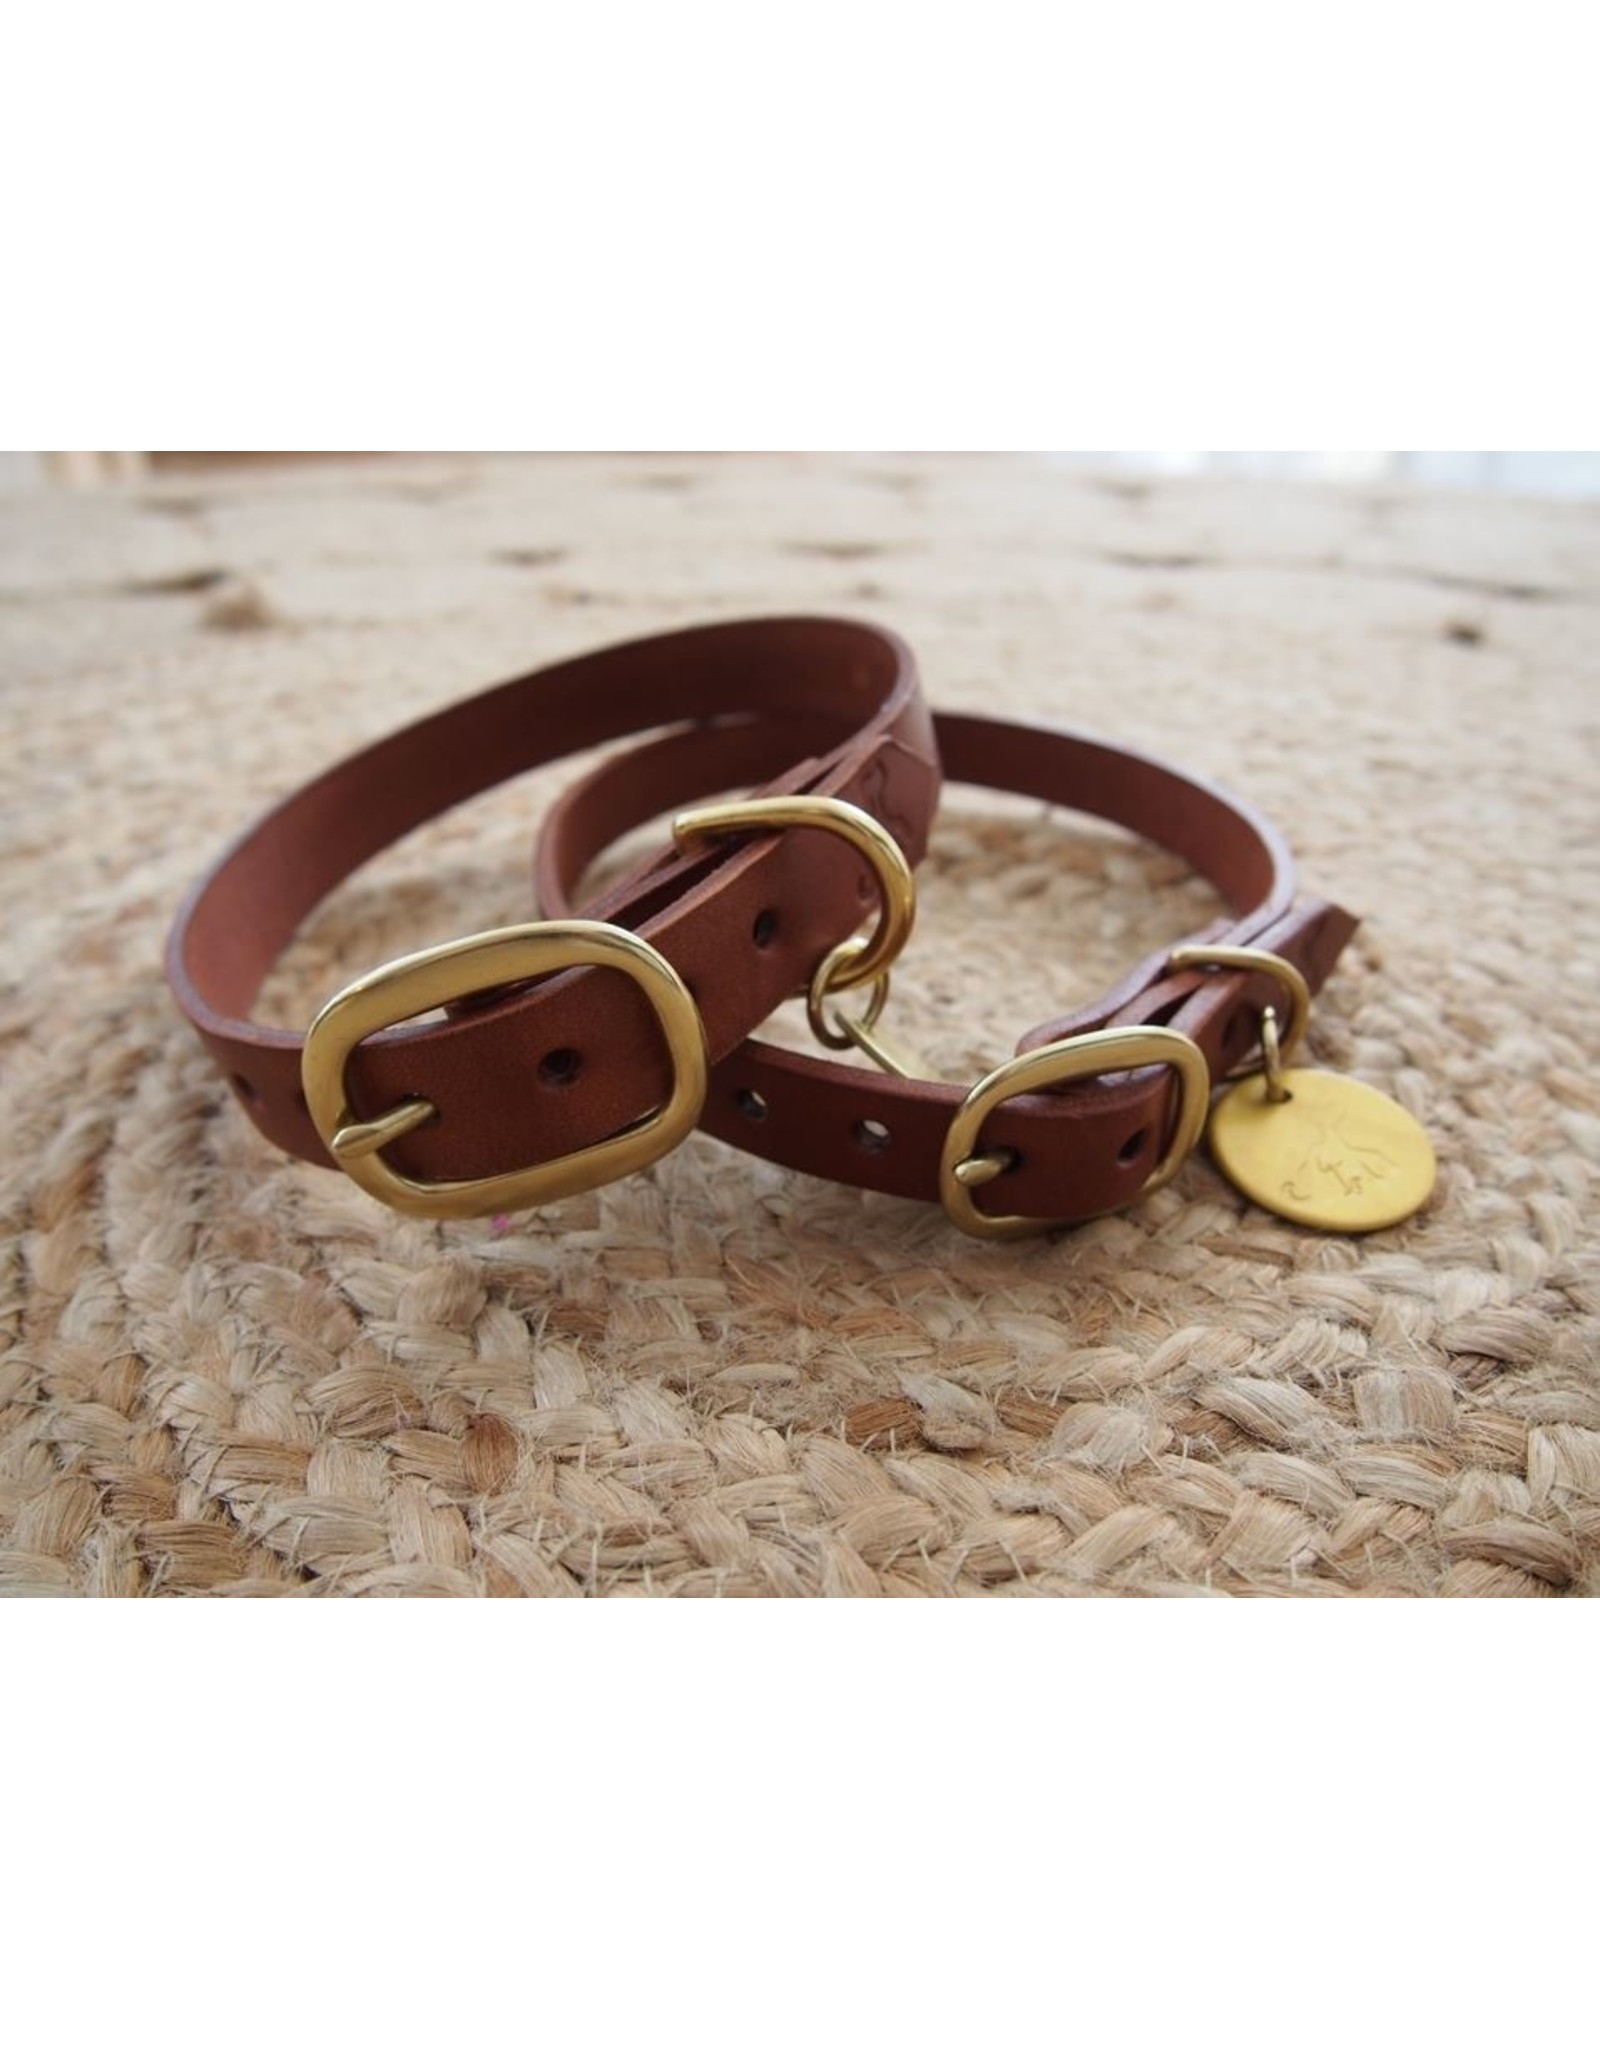 Ted & Patrick Hand Made Leather Dog Collar